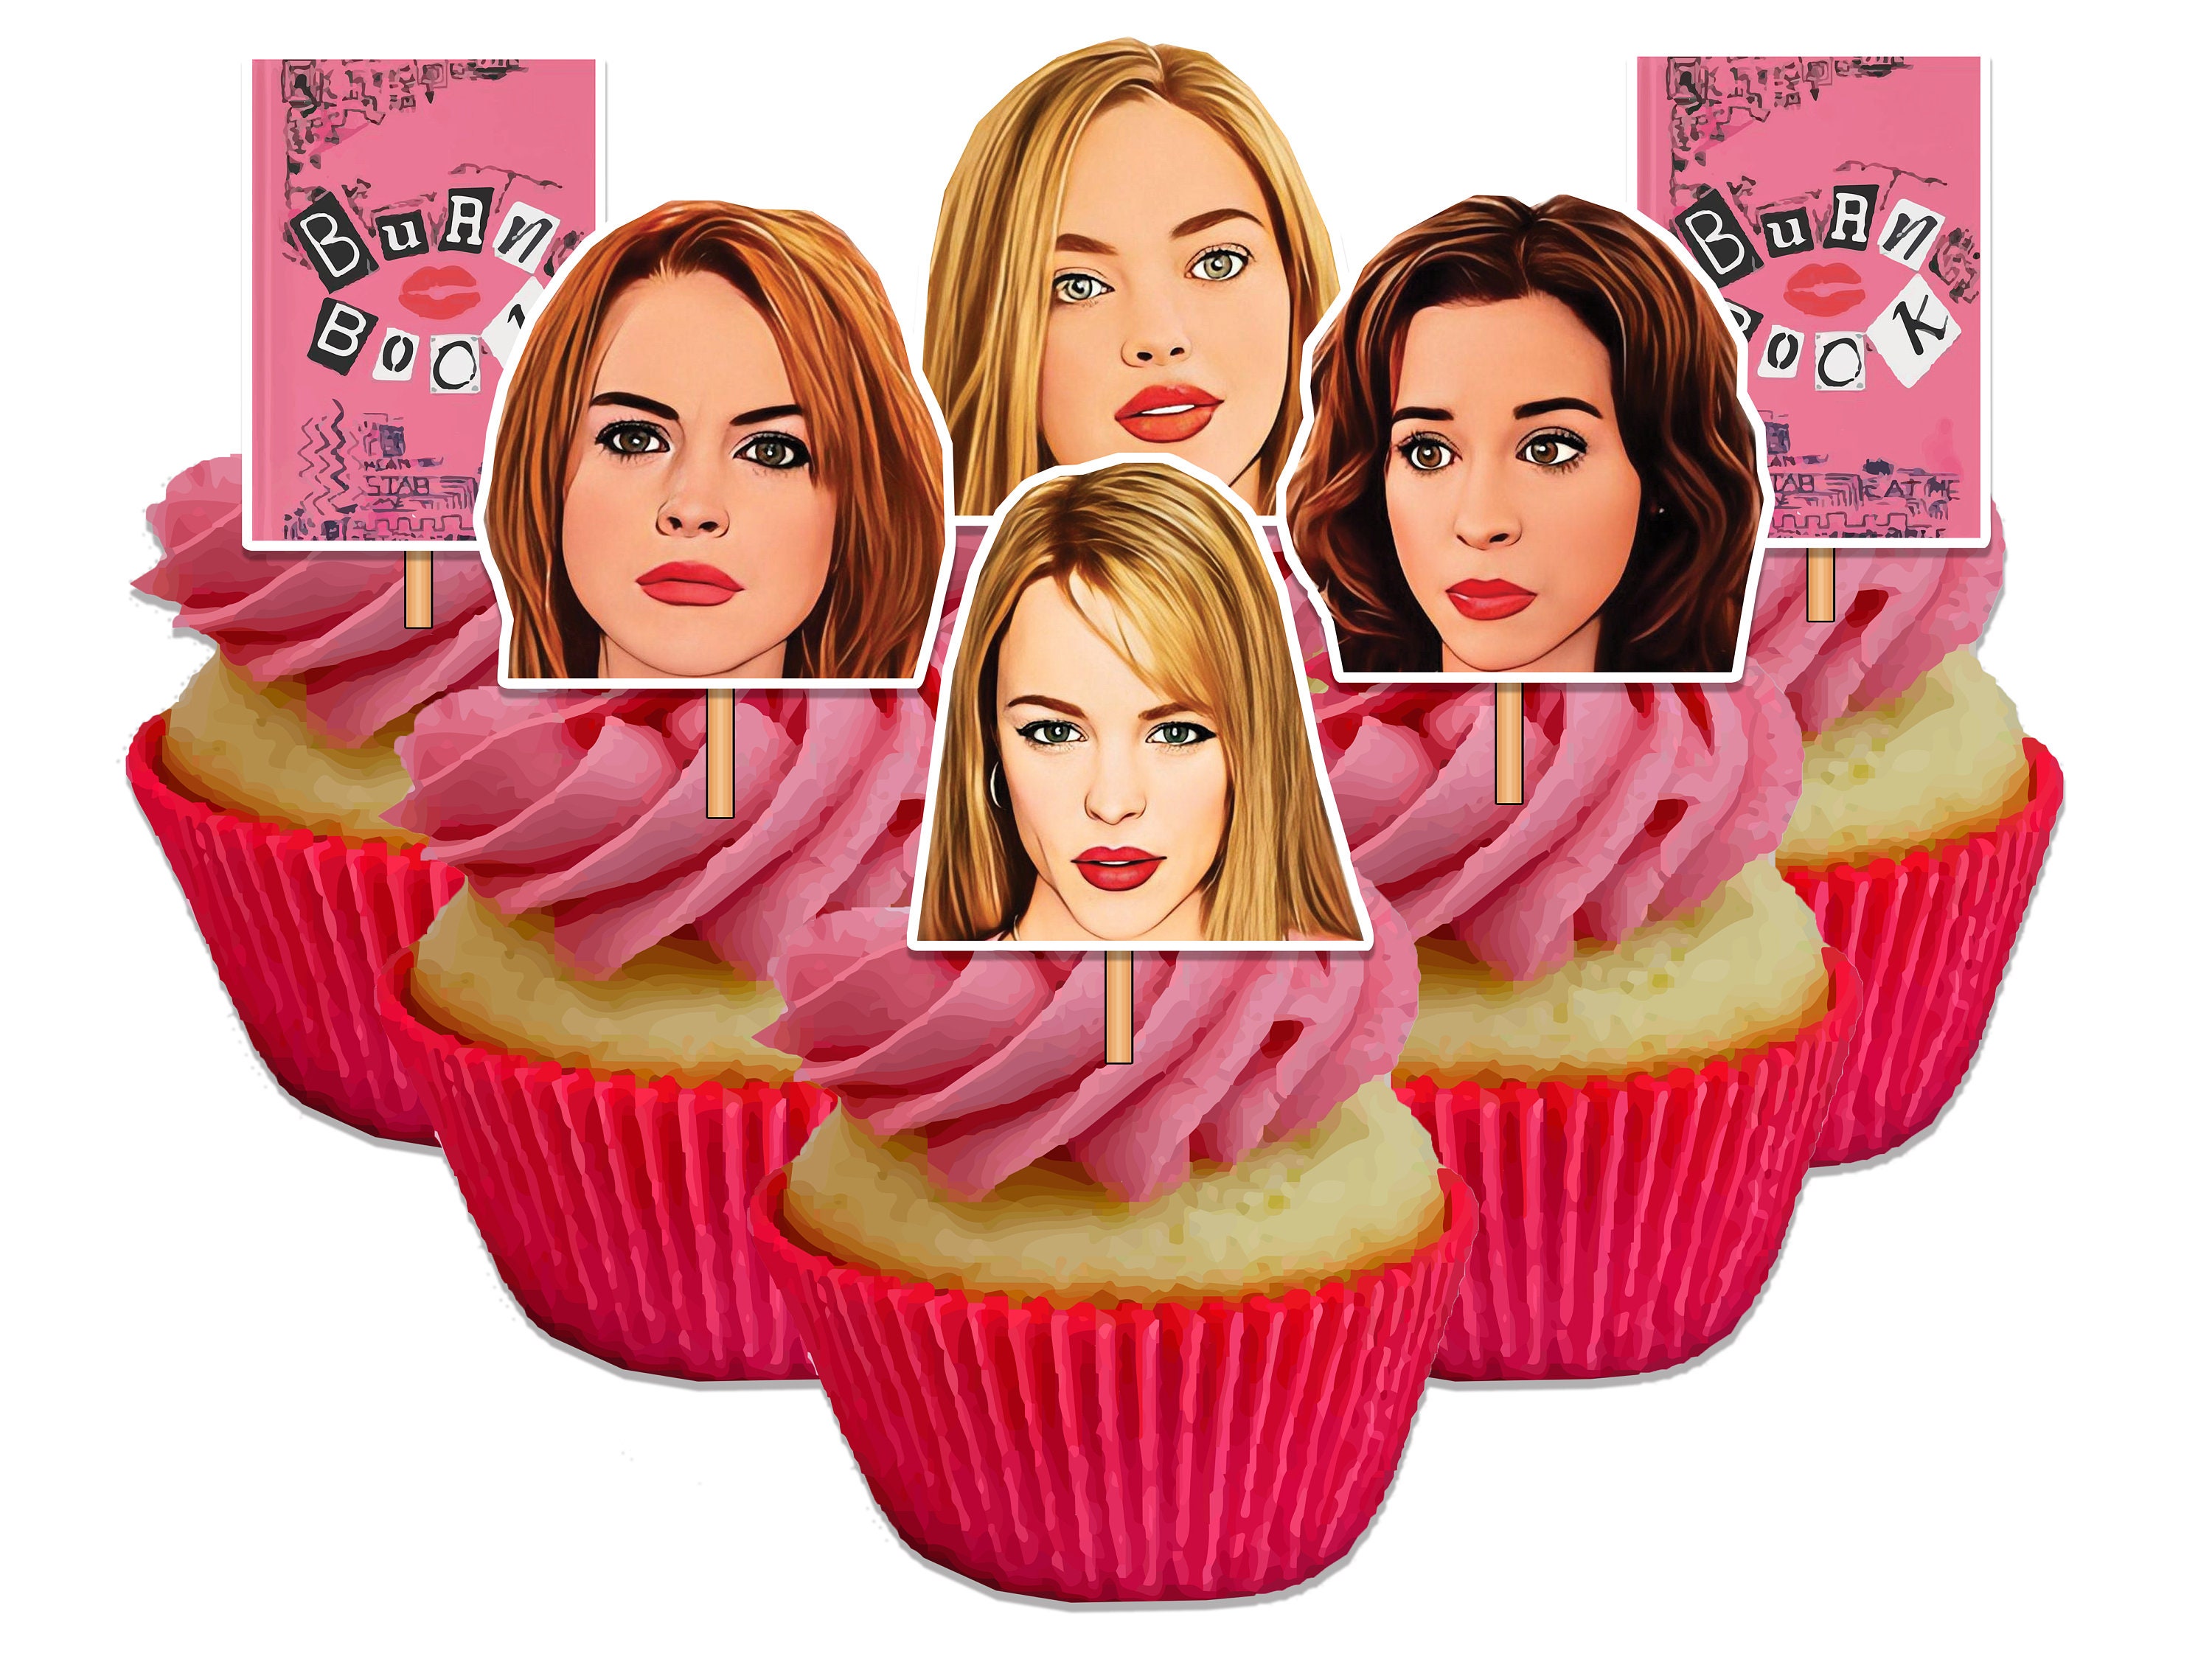  37 PCS Mean Girls Cupcake Toppers for Mean Girls Theme Party  Birthday Party Wedding Baby Shower Fans Party Cake Dessert Decorations  Supplies Picks : Grocery & Gourmet Food